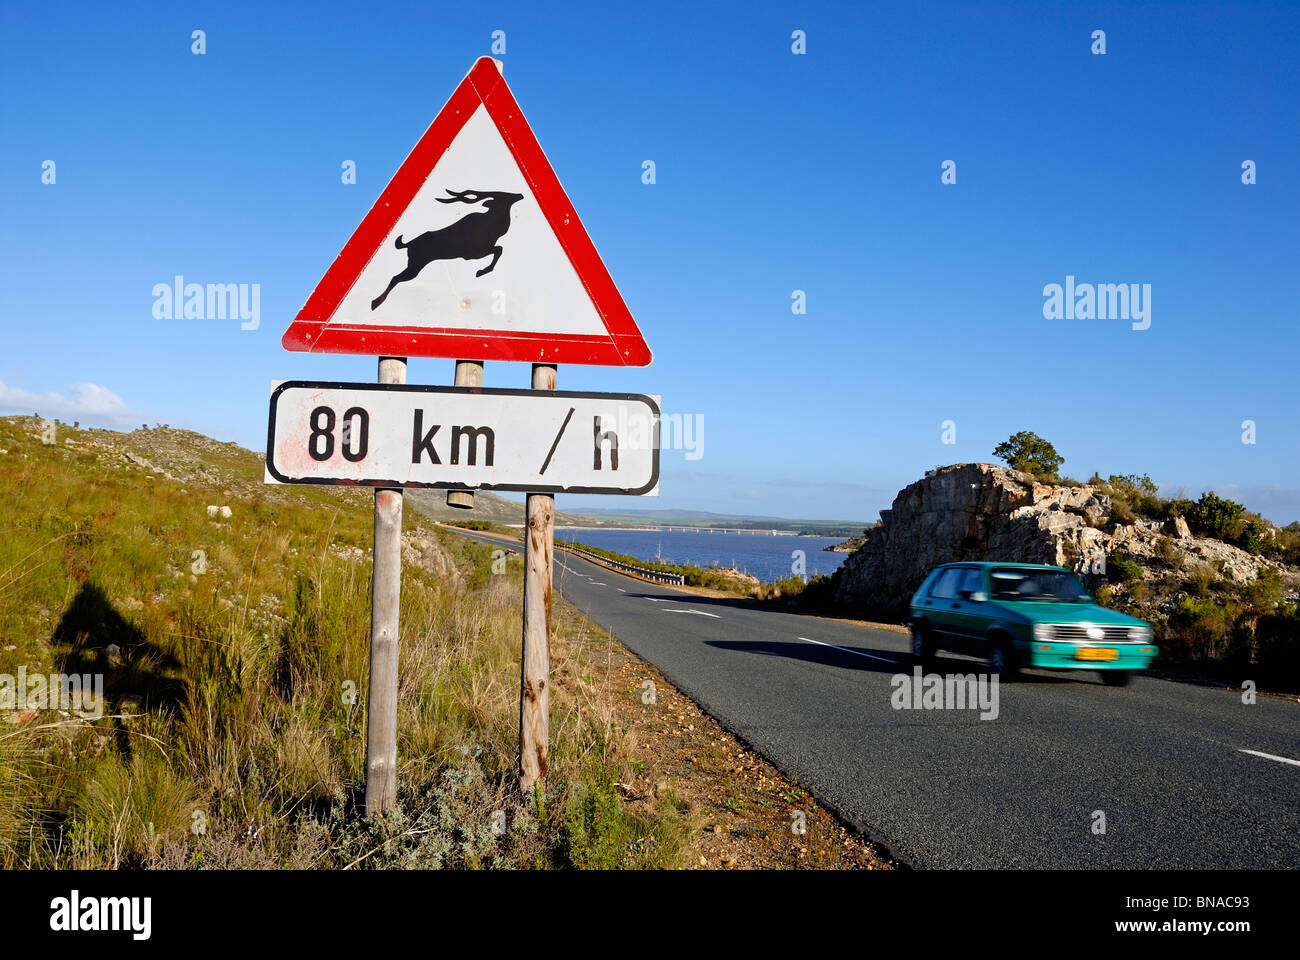 Antelope road sign and speeding car between Stellenbosch and Franschhoek, South Western Cape, South Africa Stock Photo